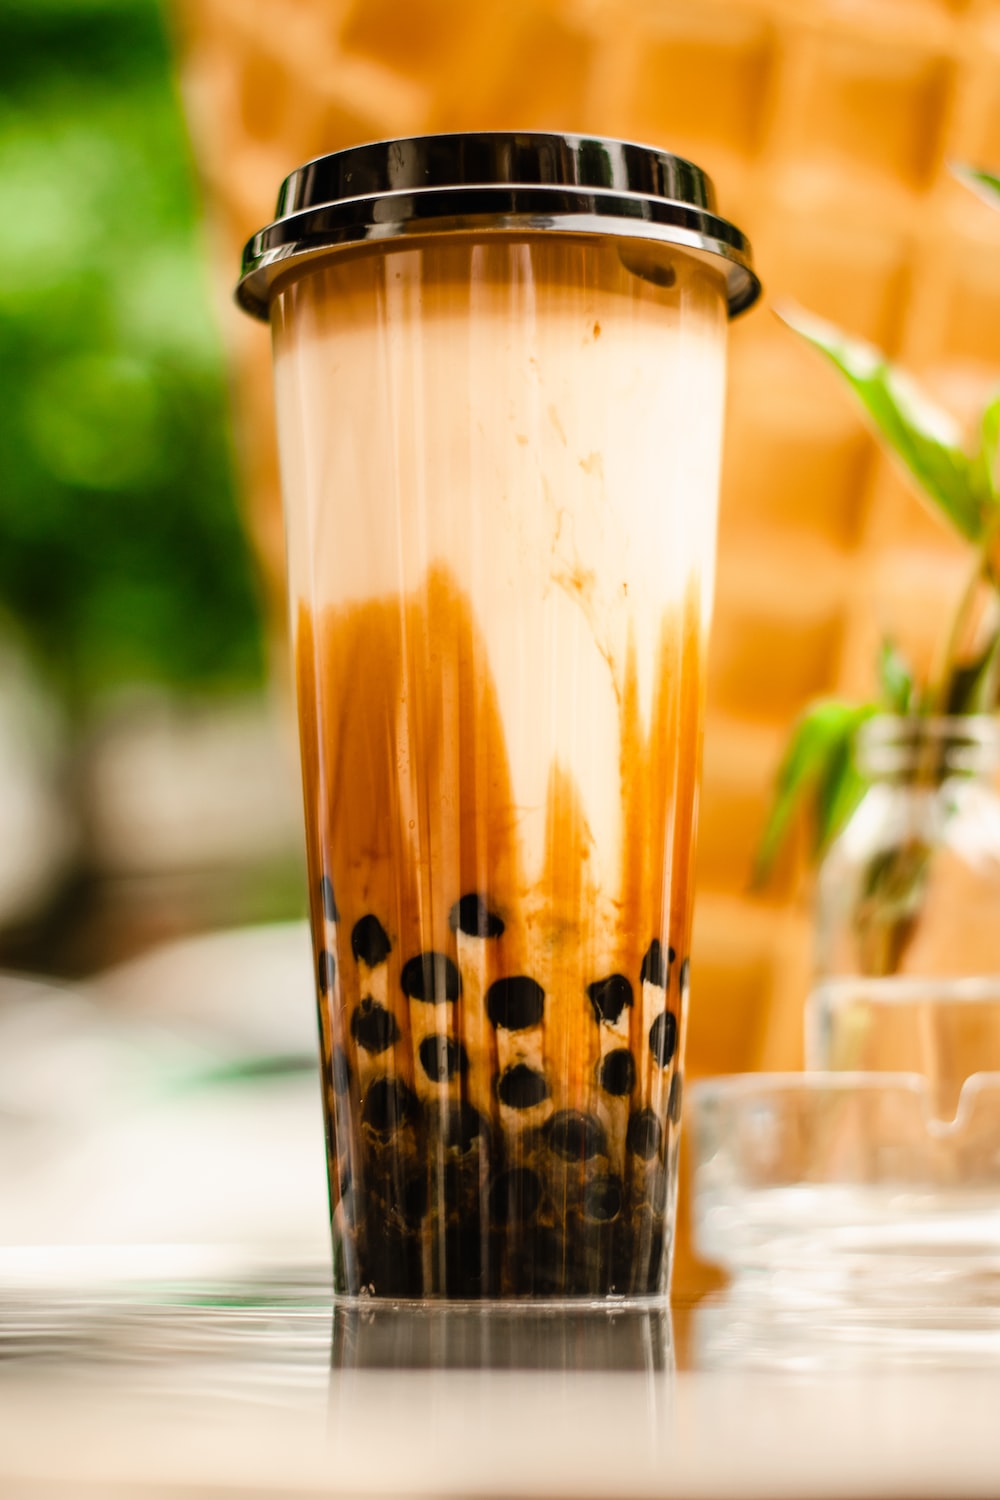 Bubble tea pictures download free images on